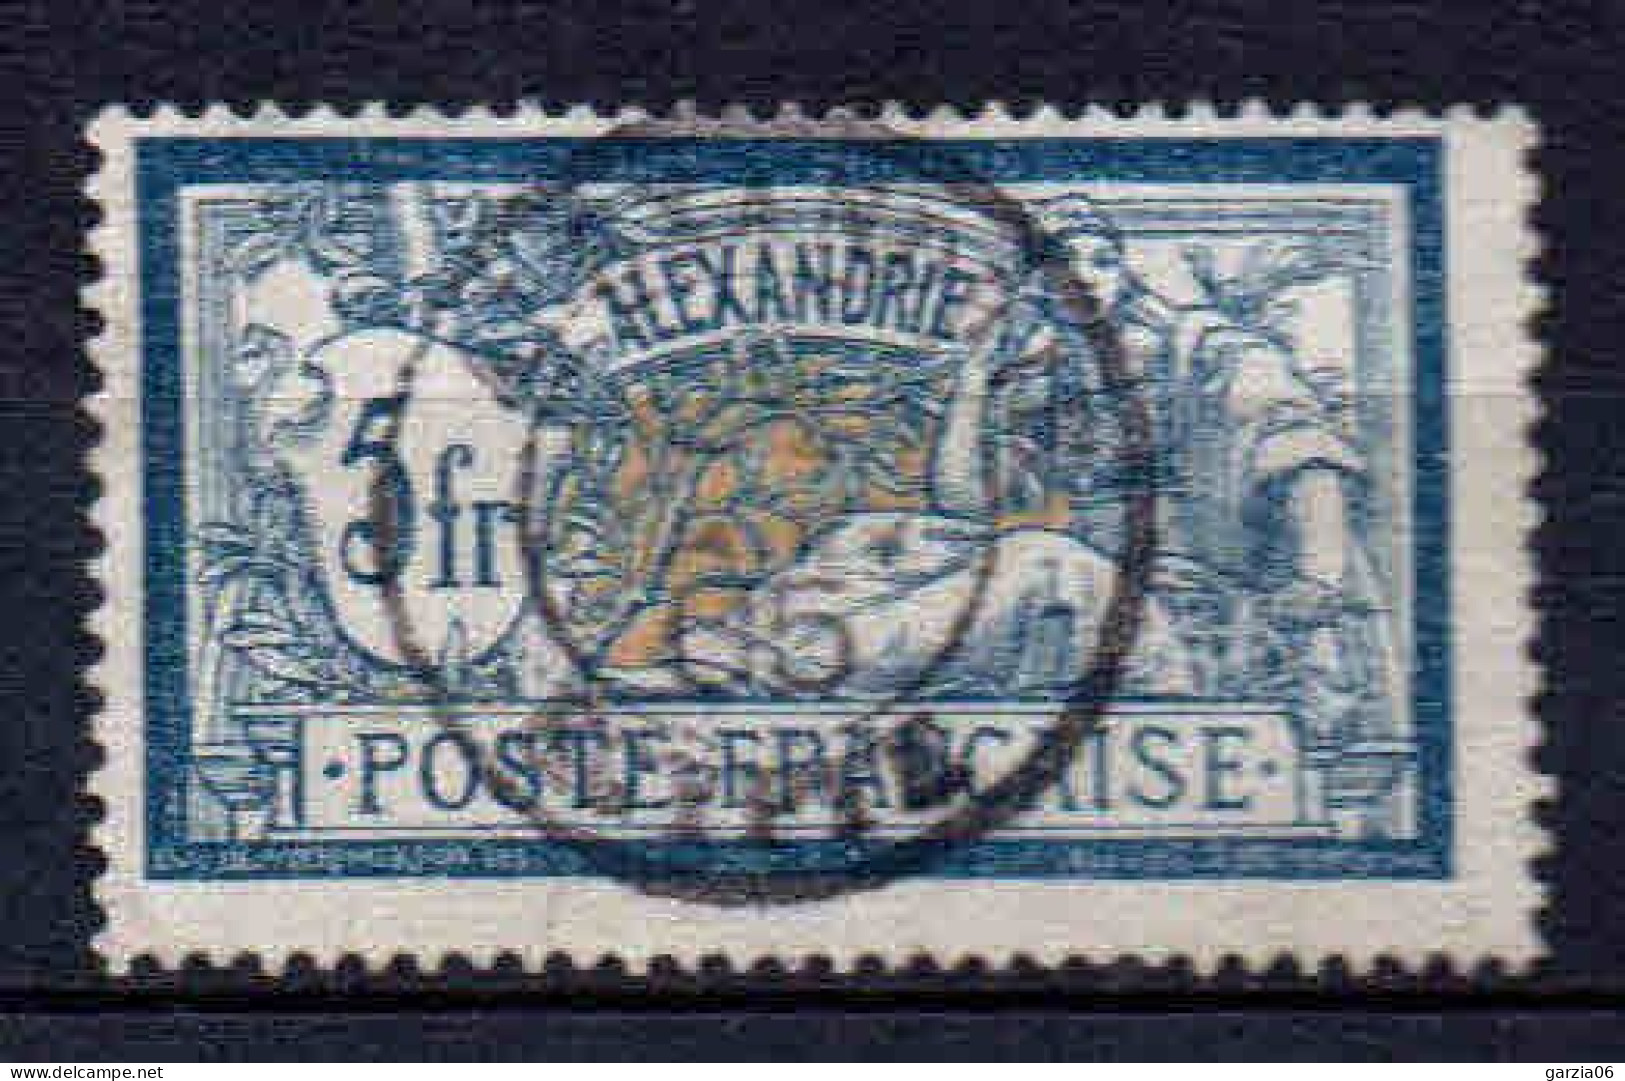 Alexandrie - 1902 -  Type Merson  -  N° 33 - Oblit - Used - Usados